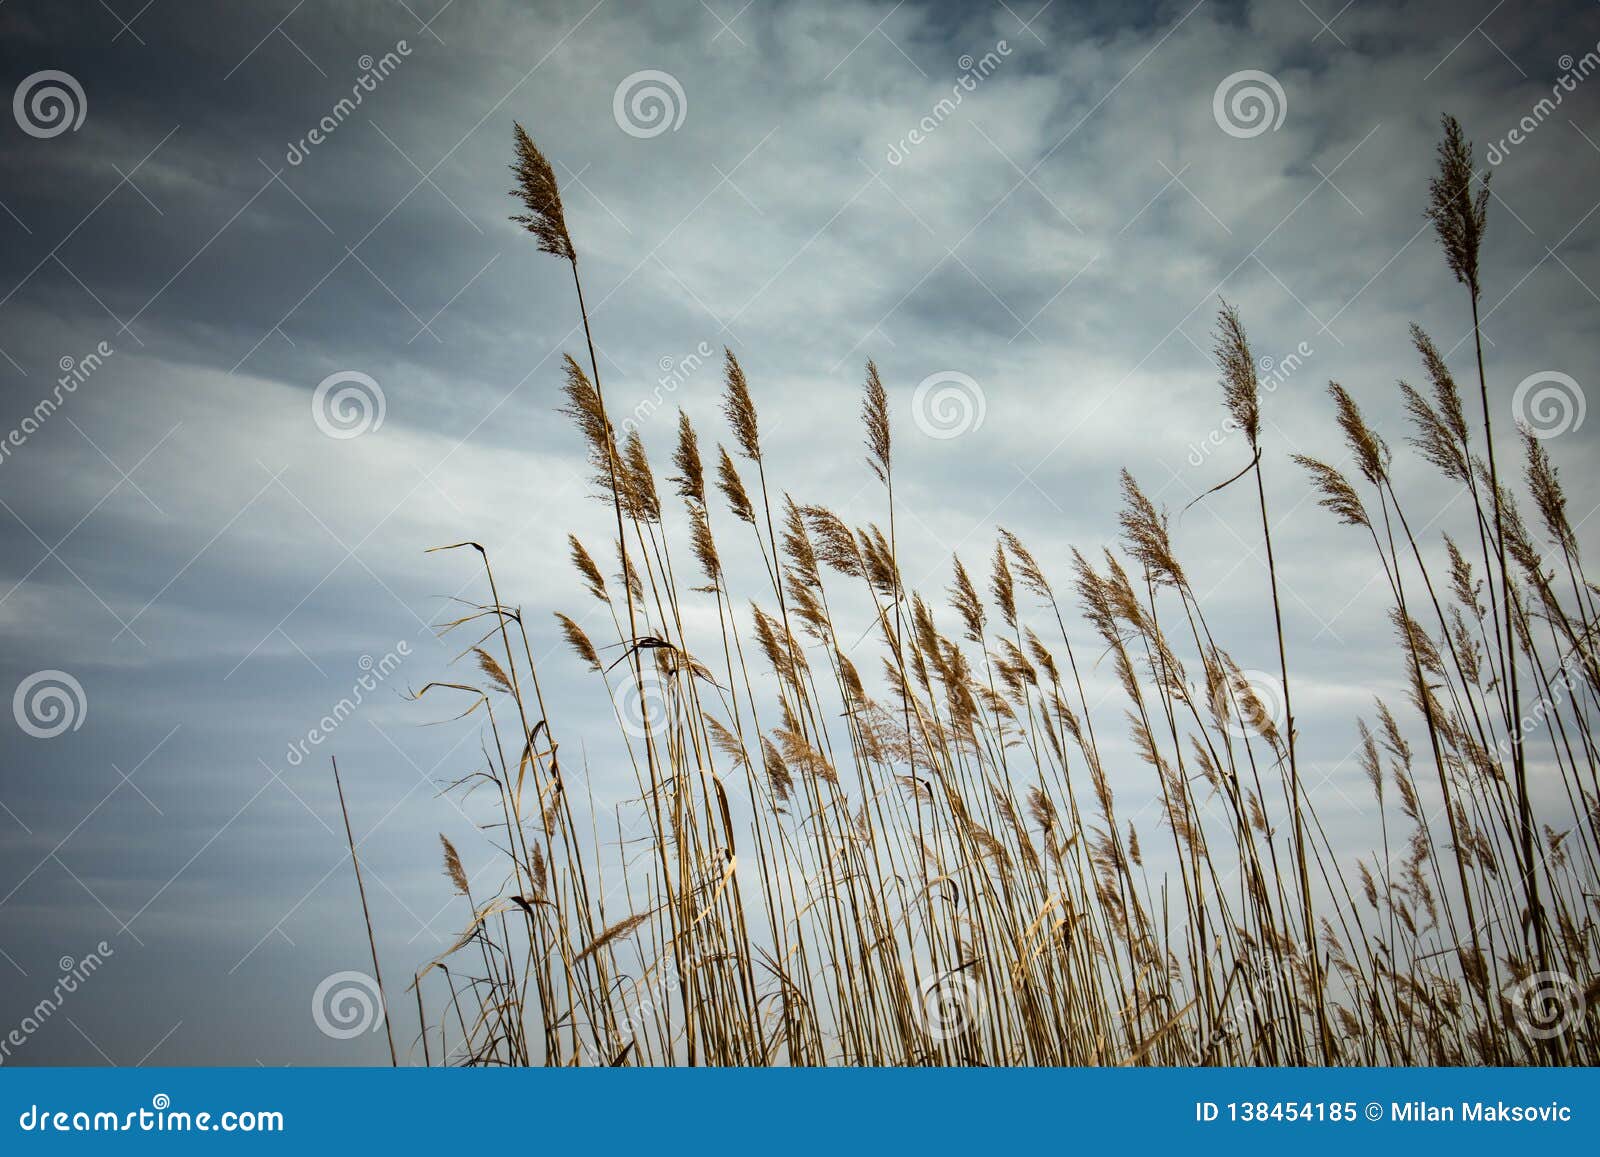 Beautiful Wallpaper of Dry Reed Plant with Dark Clouds in the Background  Stock Image - Image of meadow, grass: 138454185